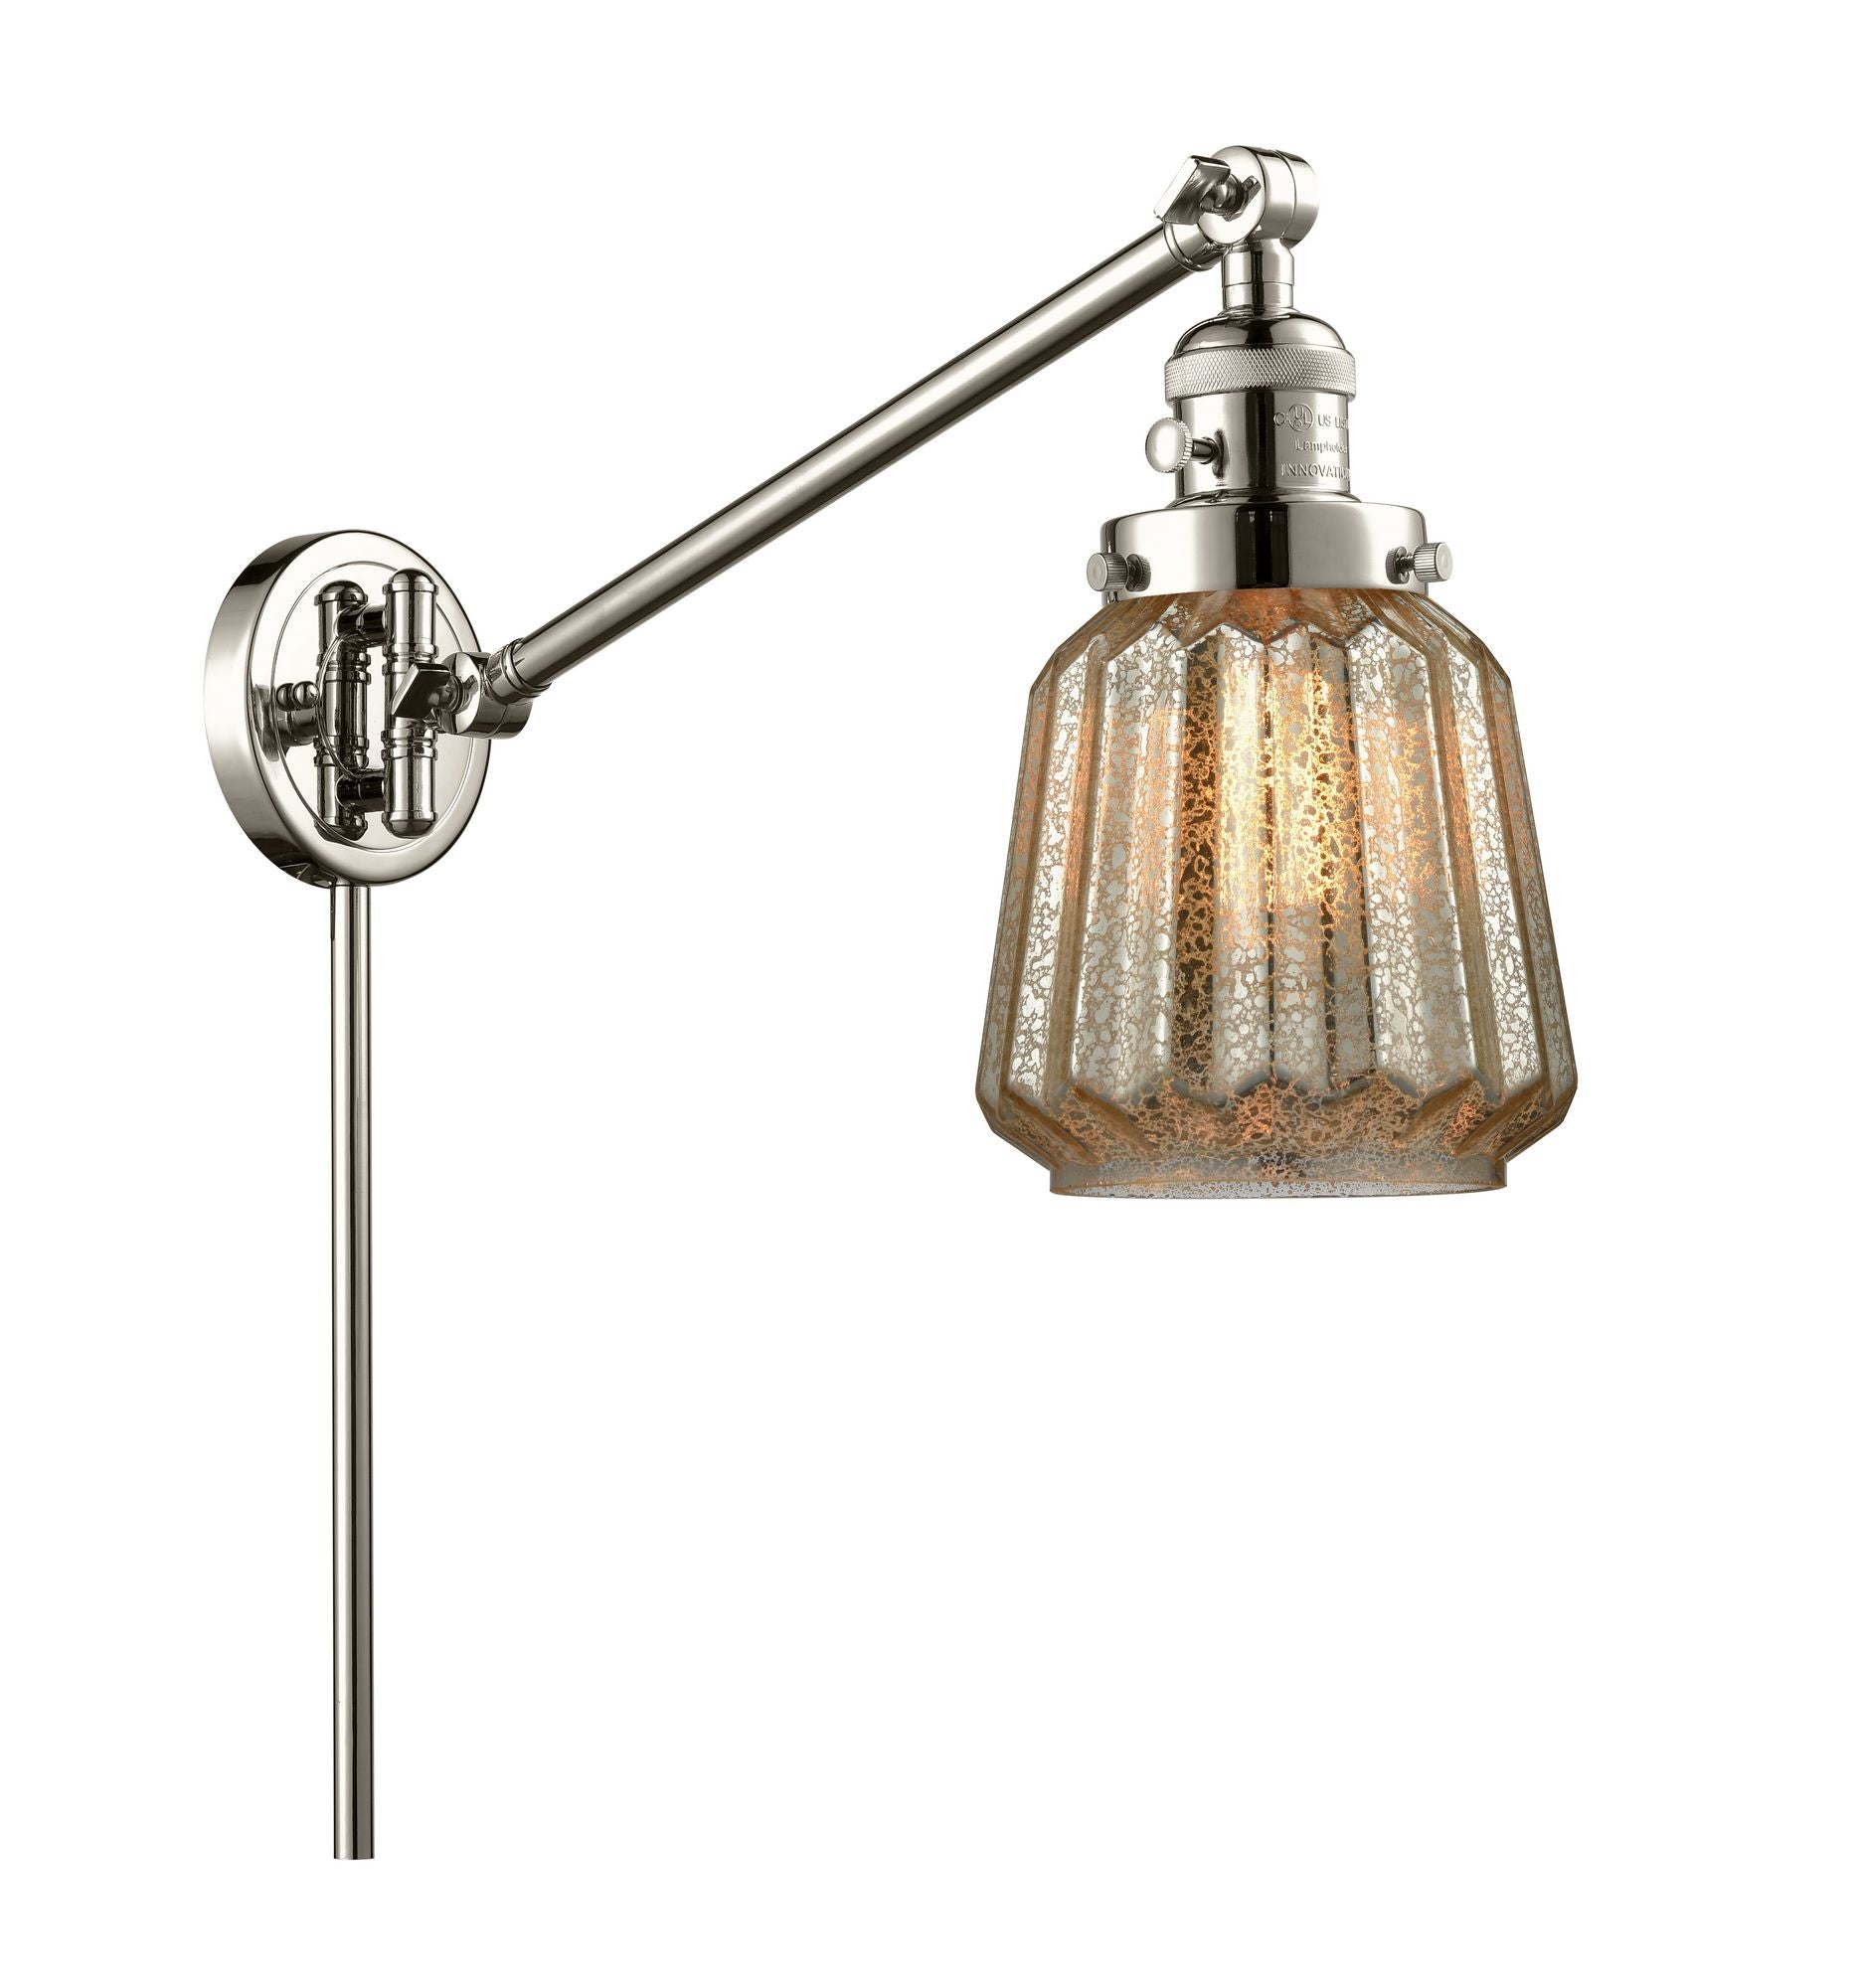 237-PN-G146 1-Light 8" Polished Nickel Swing Arm - Mercury Plated Chatham Glass - LED Bulb - Dimmensions: 8 x 35 x 25 - Glass Up or Down: Yes